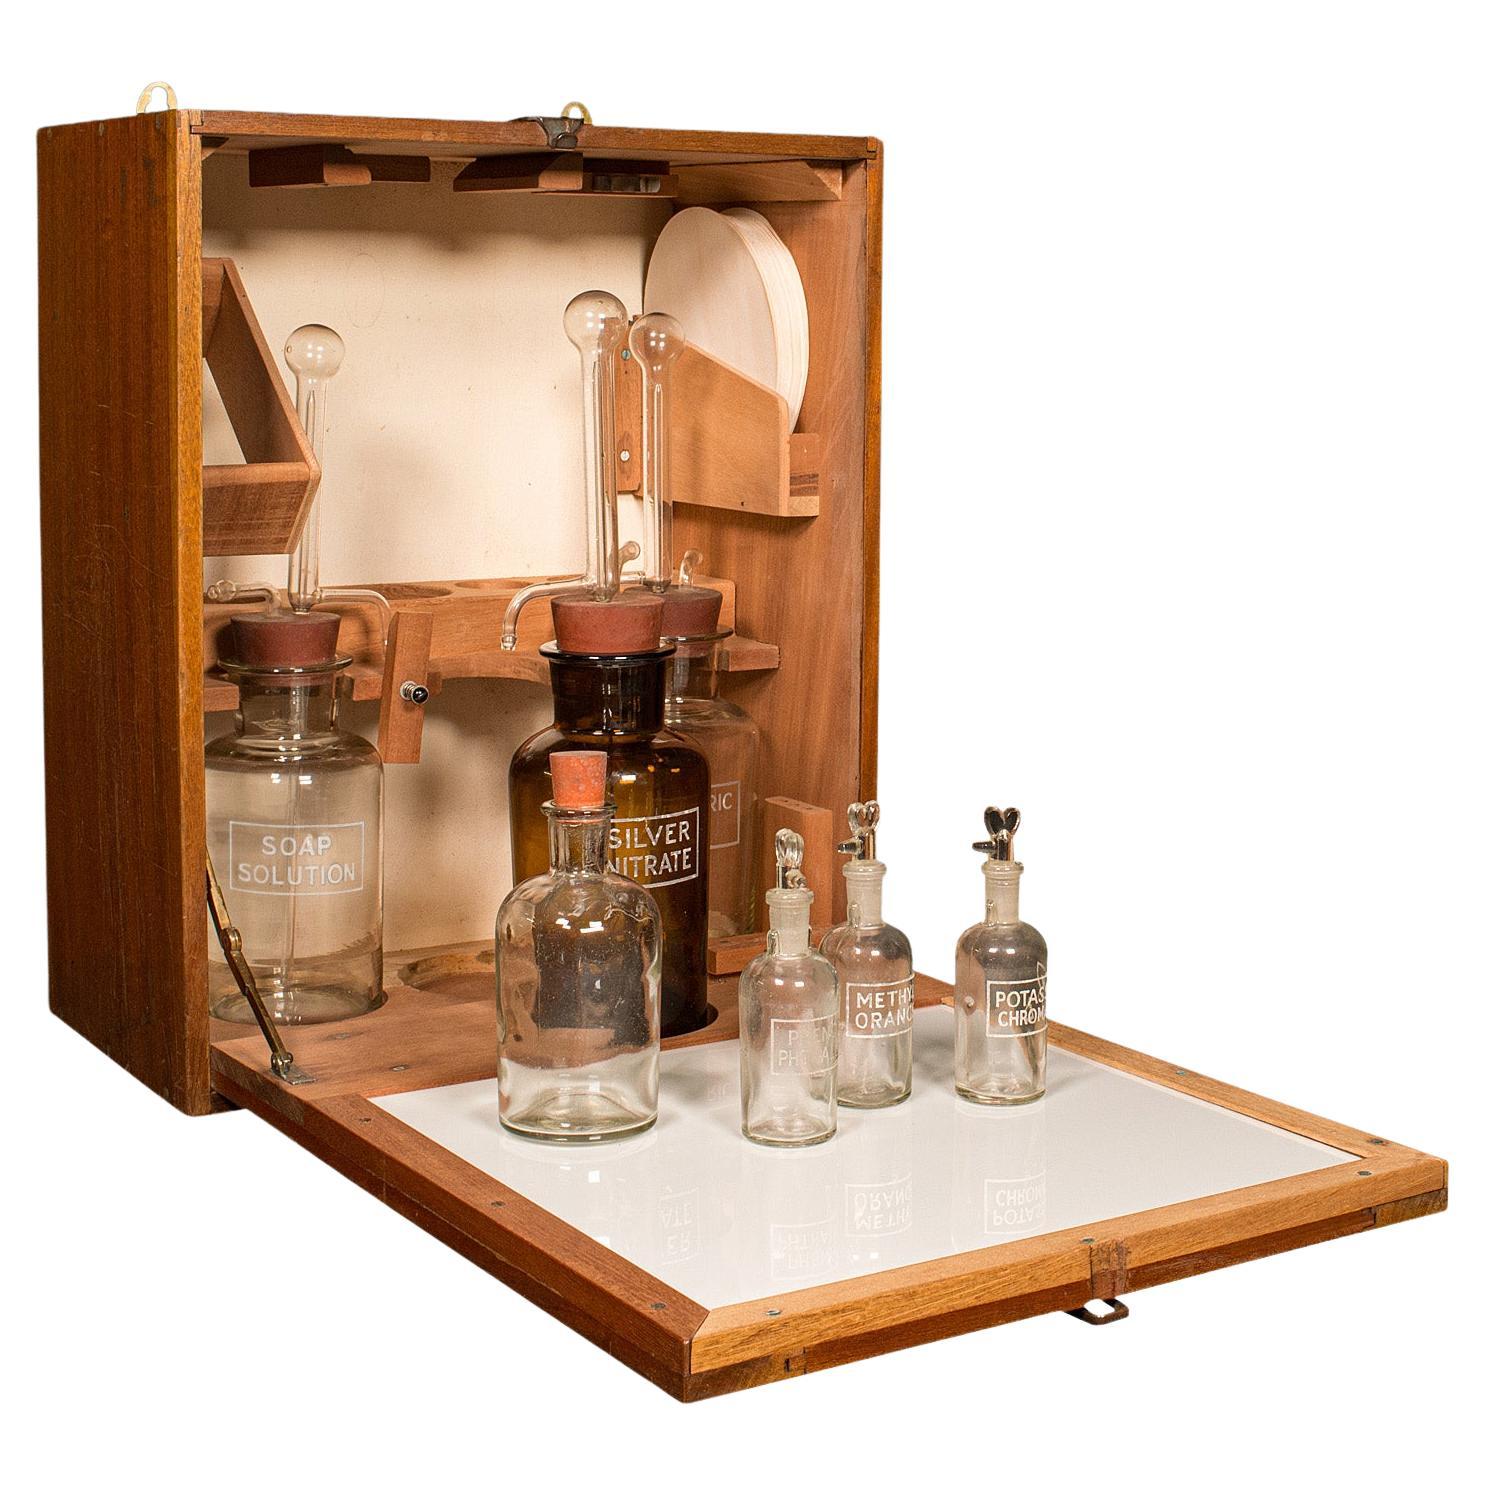 Vintage Chemist's Dispensing Cabinet, English, Walnut, Apothecary Set, C.1950 For Sale